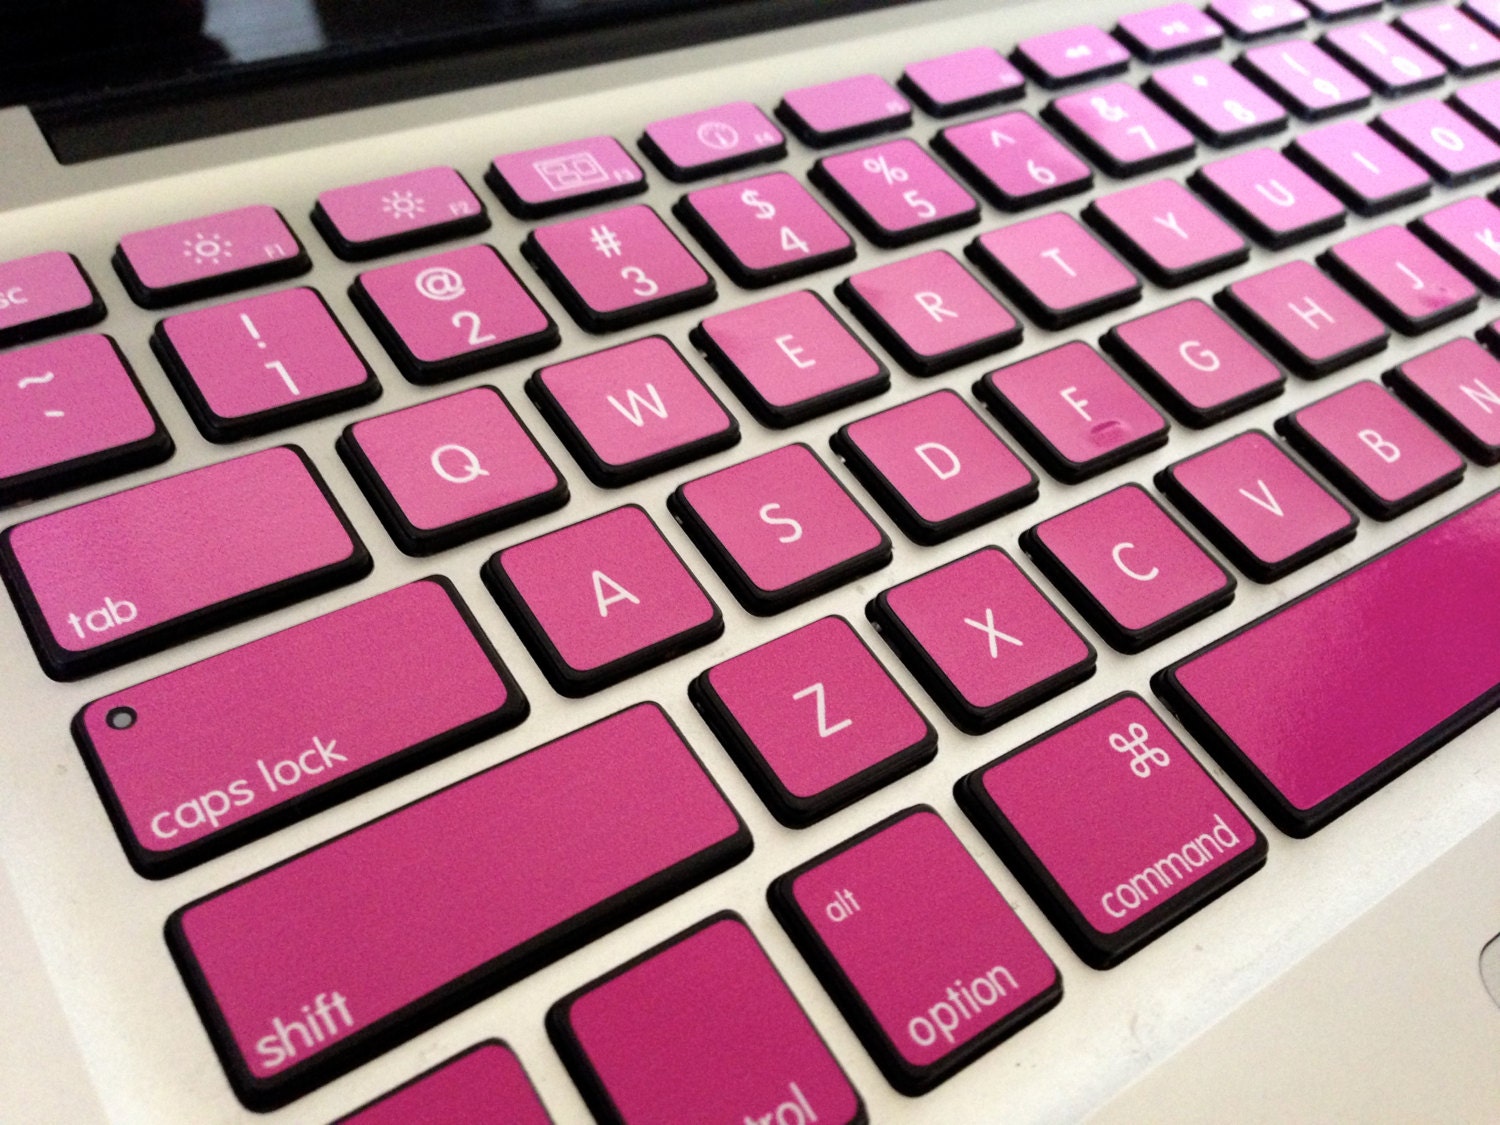 Ombre Pink iMac MacBook Pro and MacBook Air Keyboard